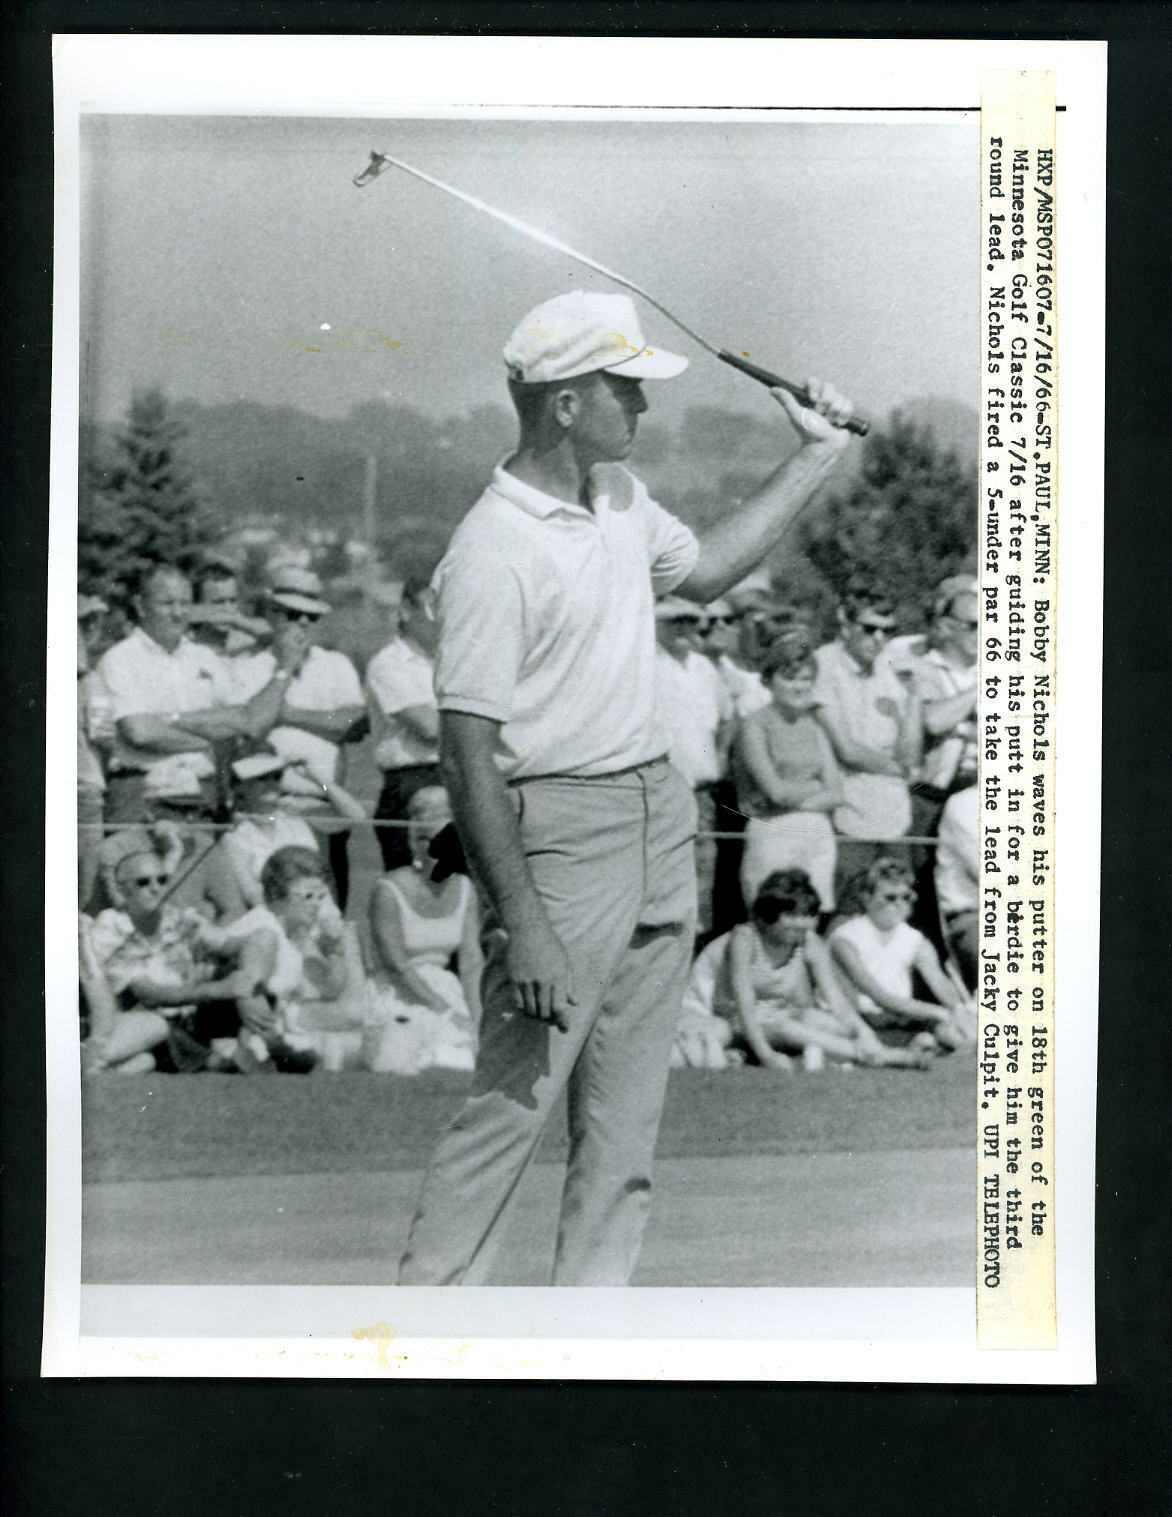 Bobby Nichols putting at Minnesota Golf Classic 1966 Press Photo Poster painting Keller Course